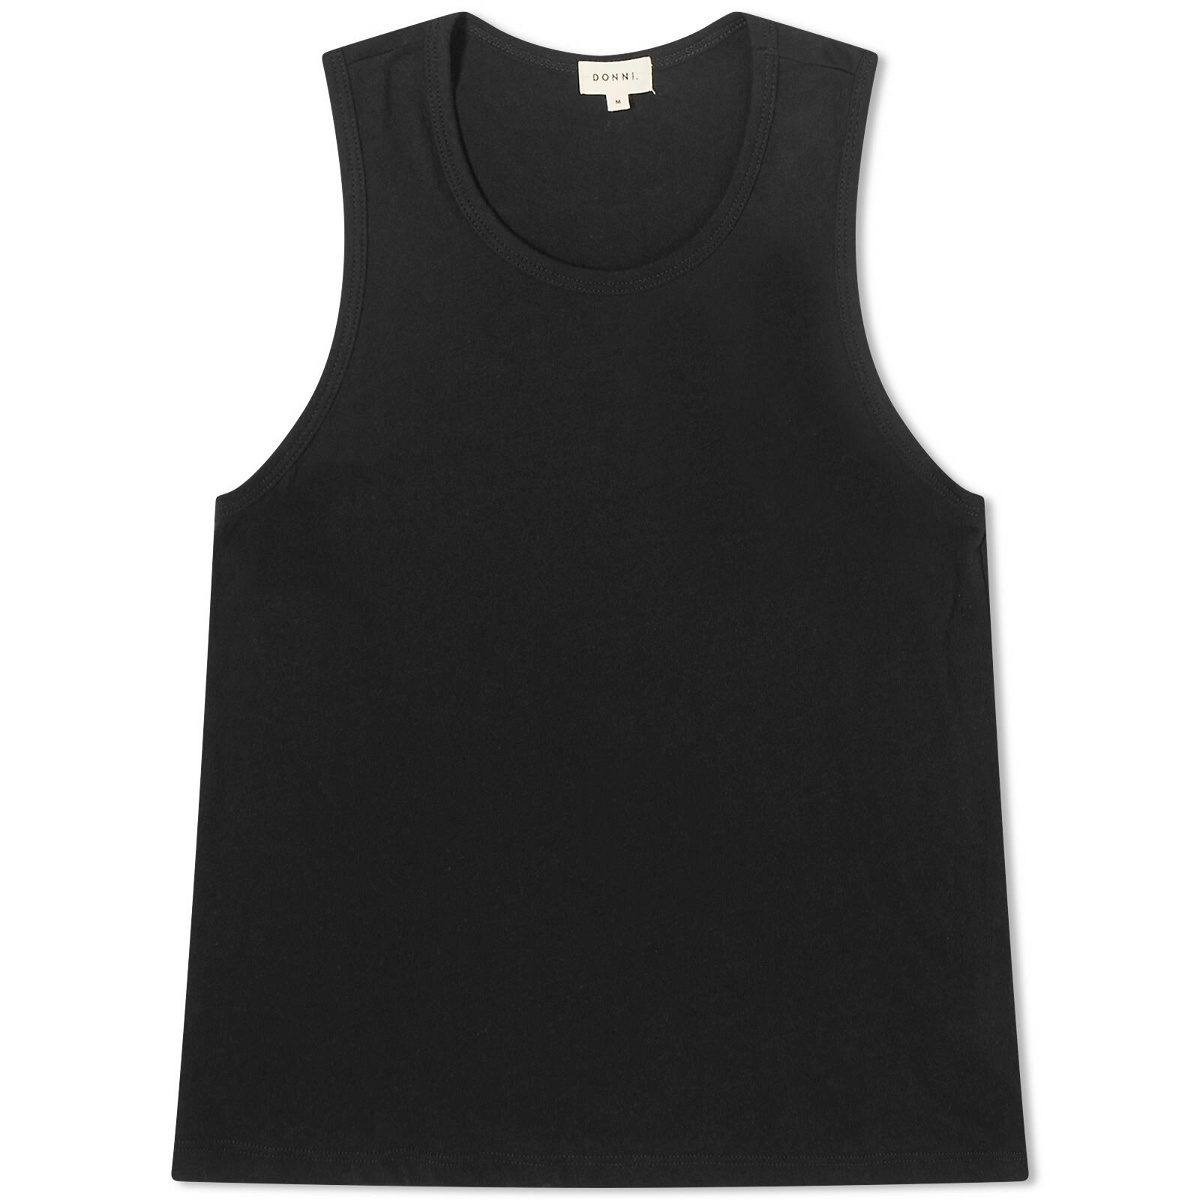 DONNI. Women's Jersey Basic Tank Top in Jet DONNI.